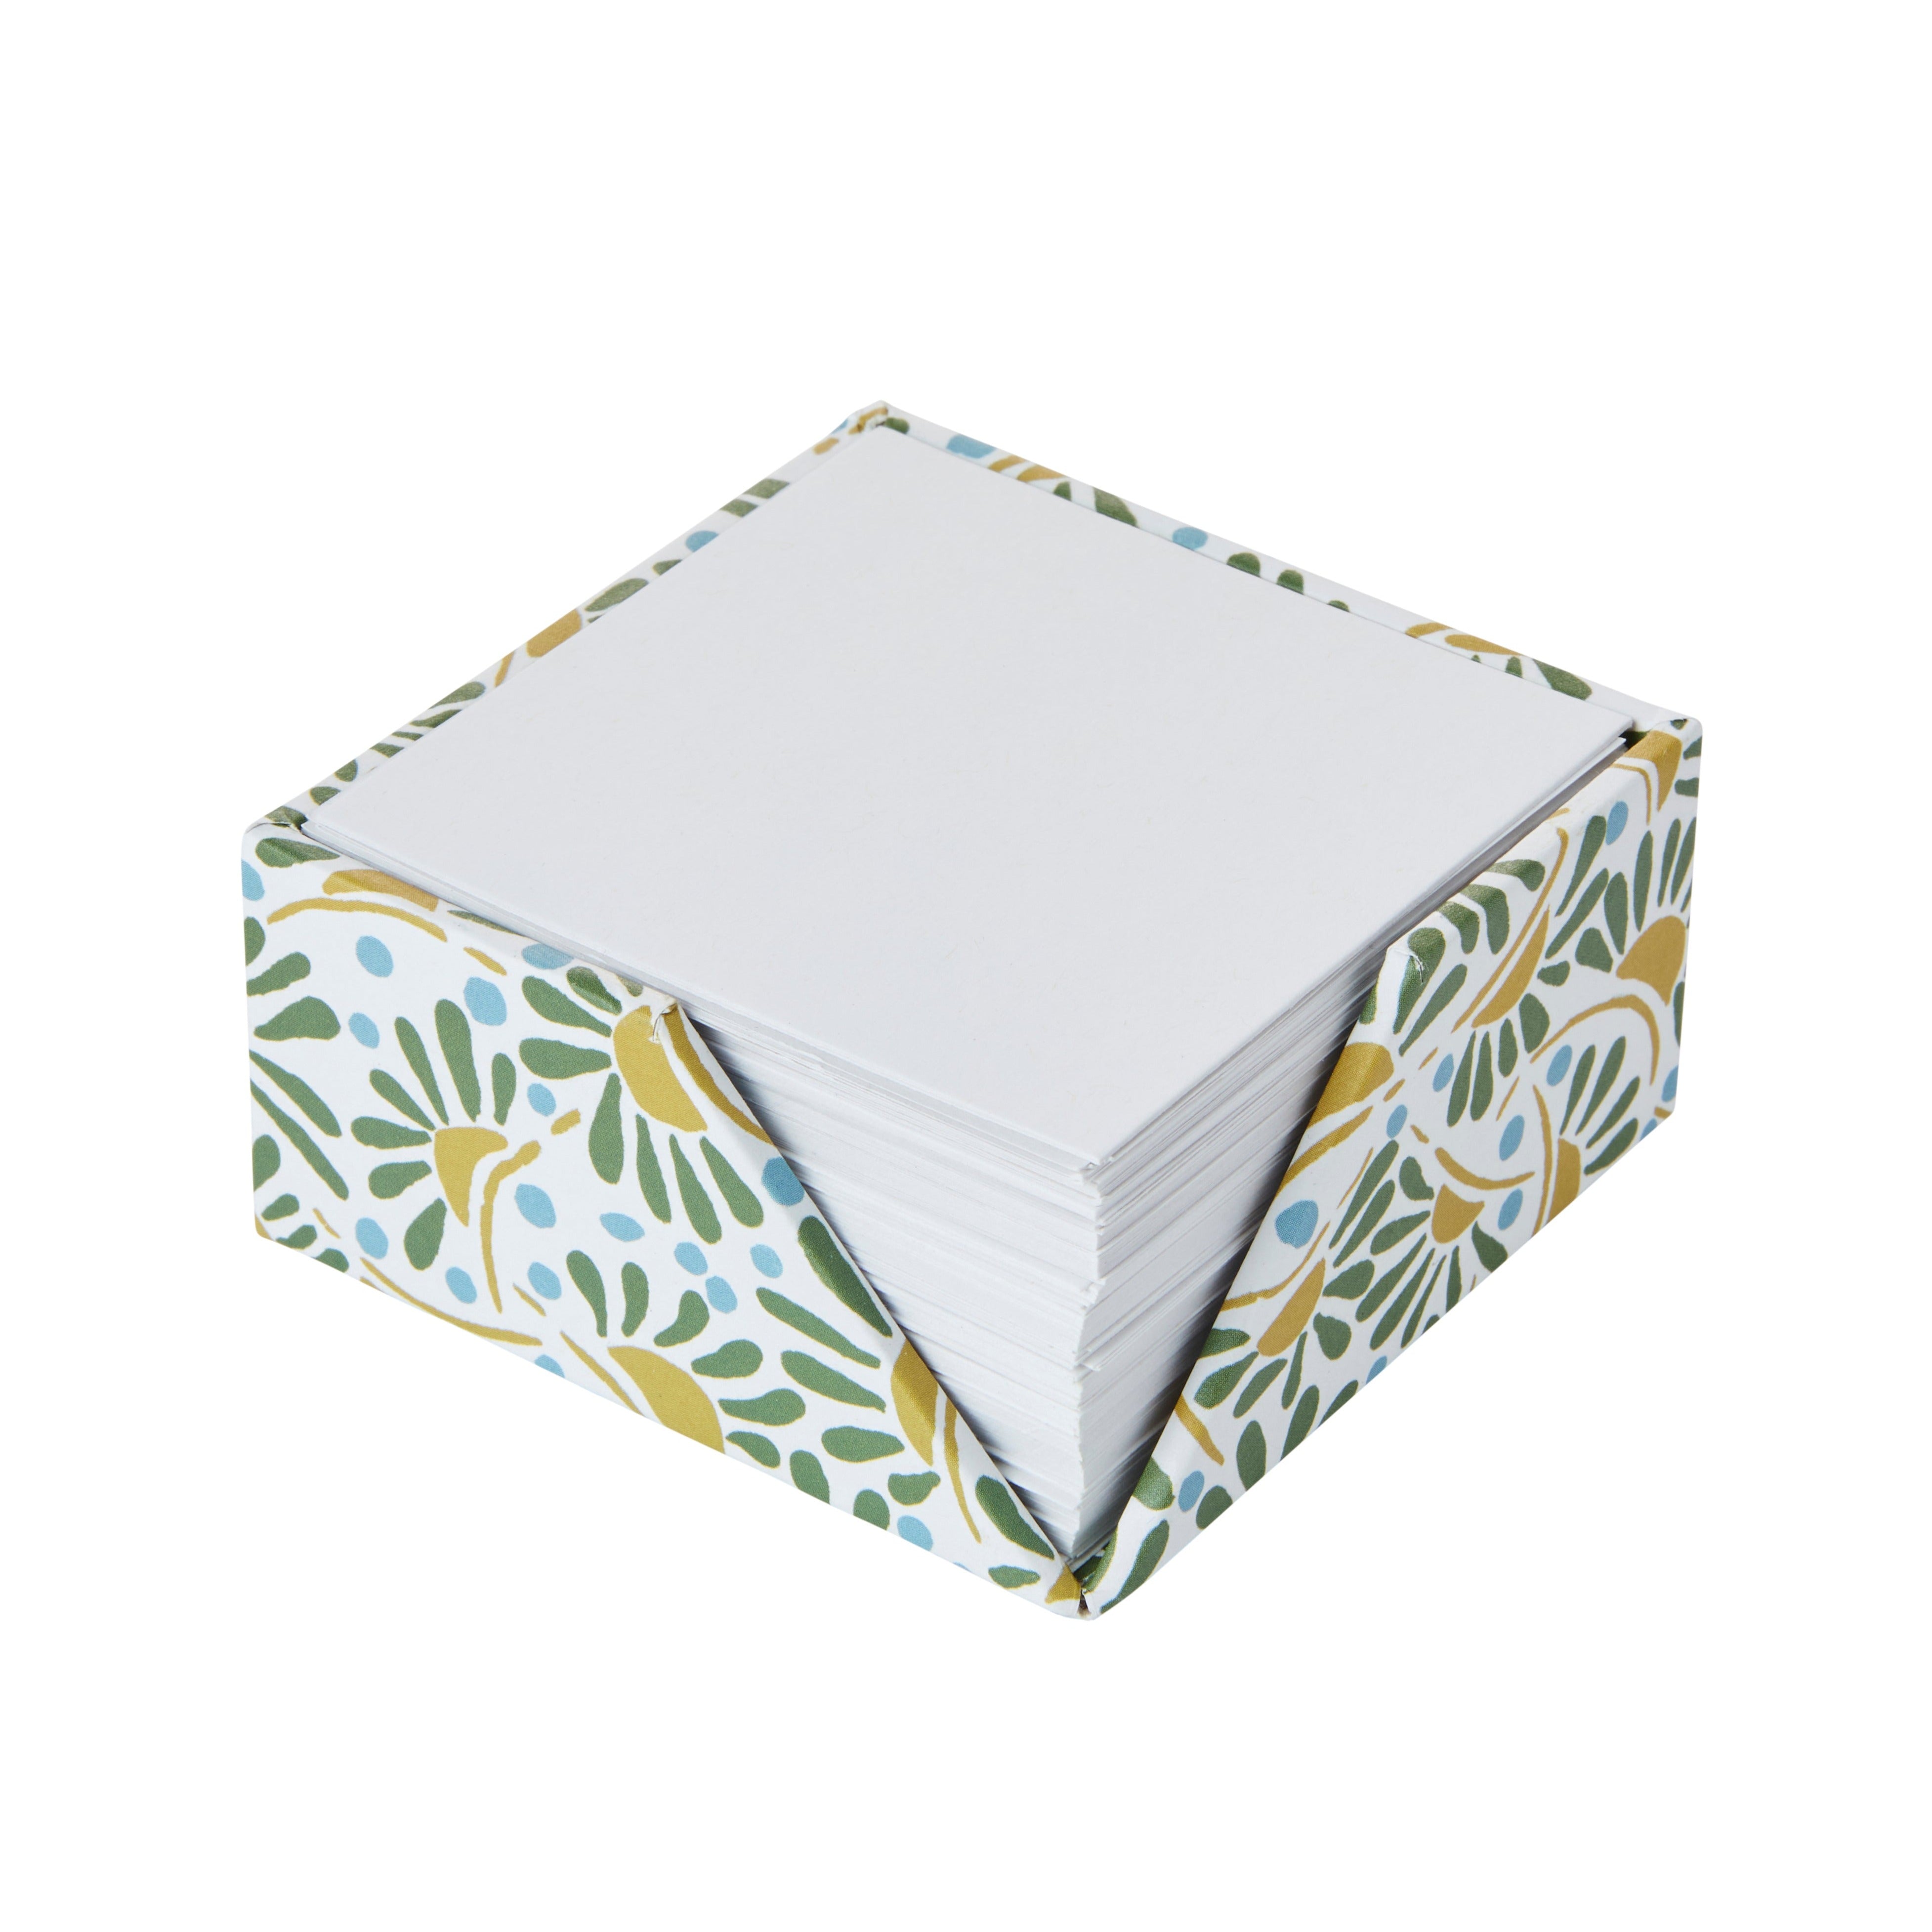 Nina Campbell post it memo box in yellow and green colour way stationery collection on white background